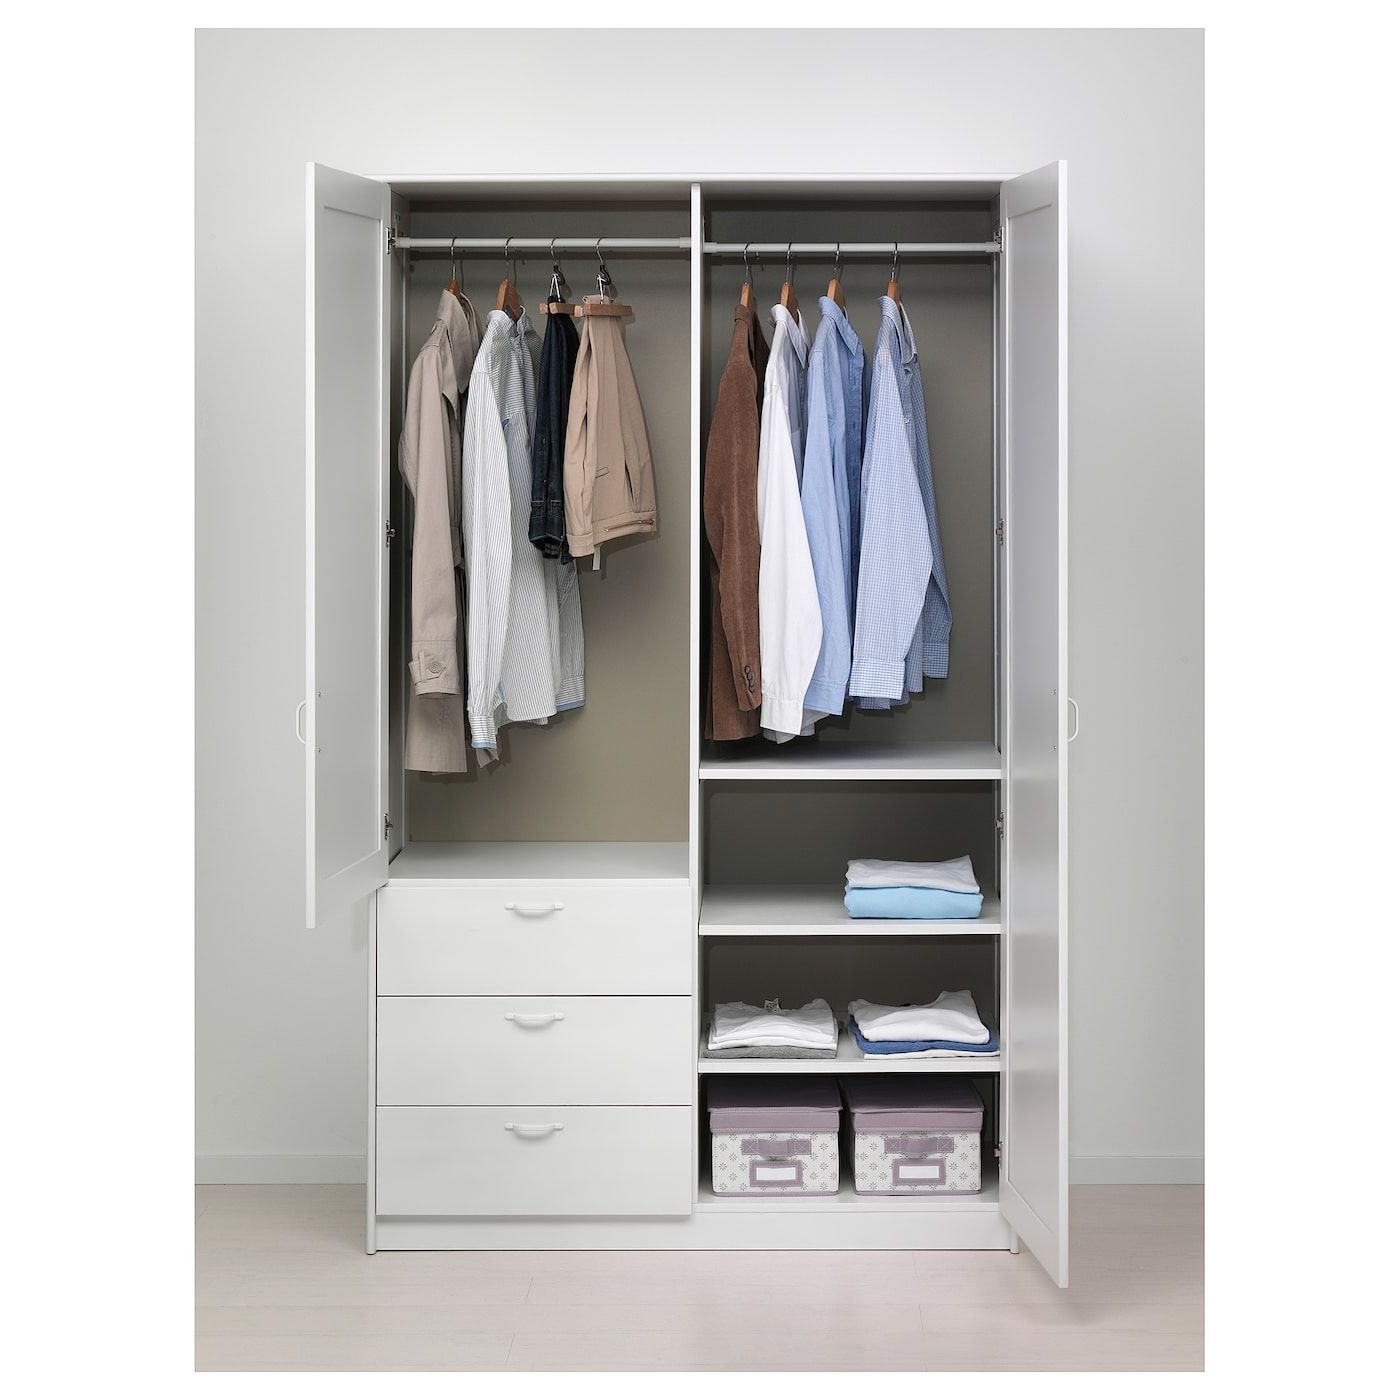 Widely Used Musken Wardrobe With 2 Doors+3 Drawers, White, 124x60x201 Cm – Ikea With Regard To Wardrobes With 3 Drawers (View 5 of 10)